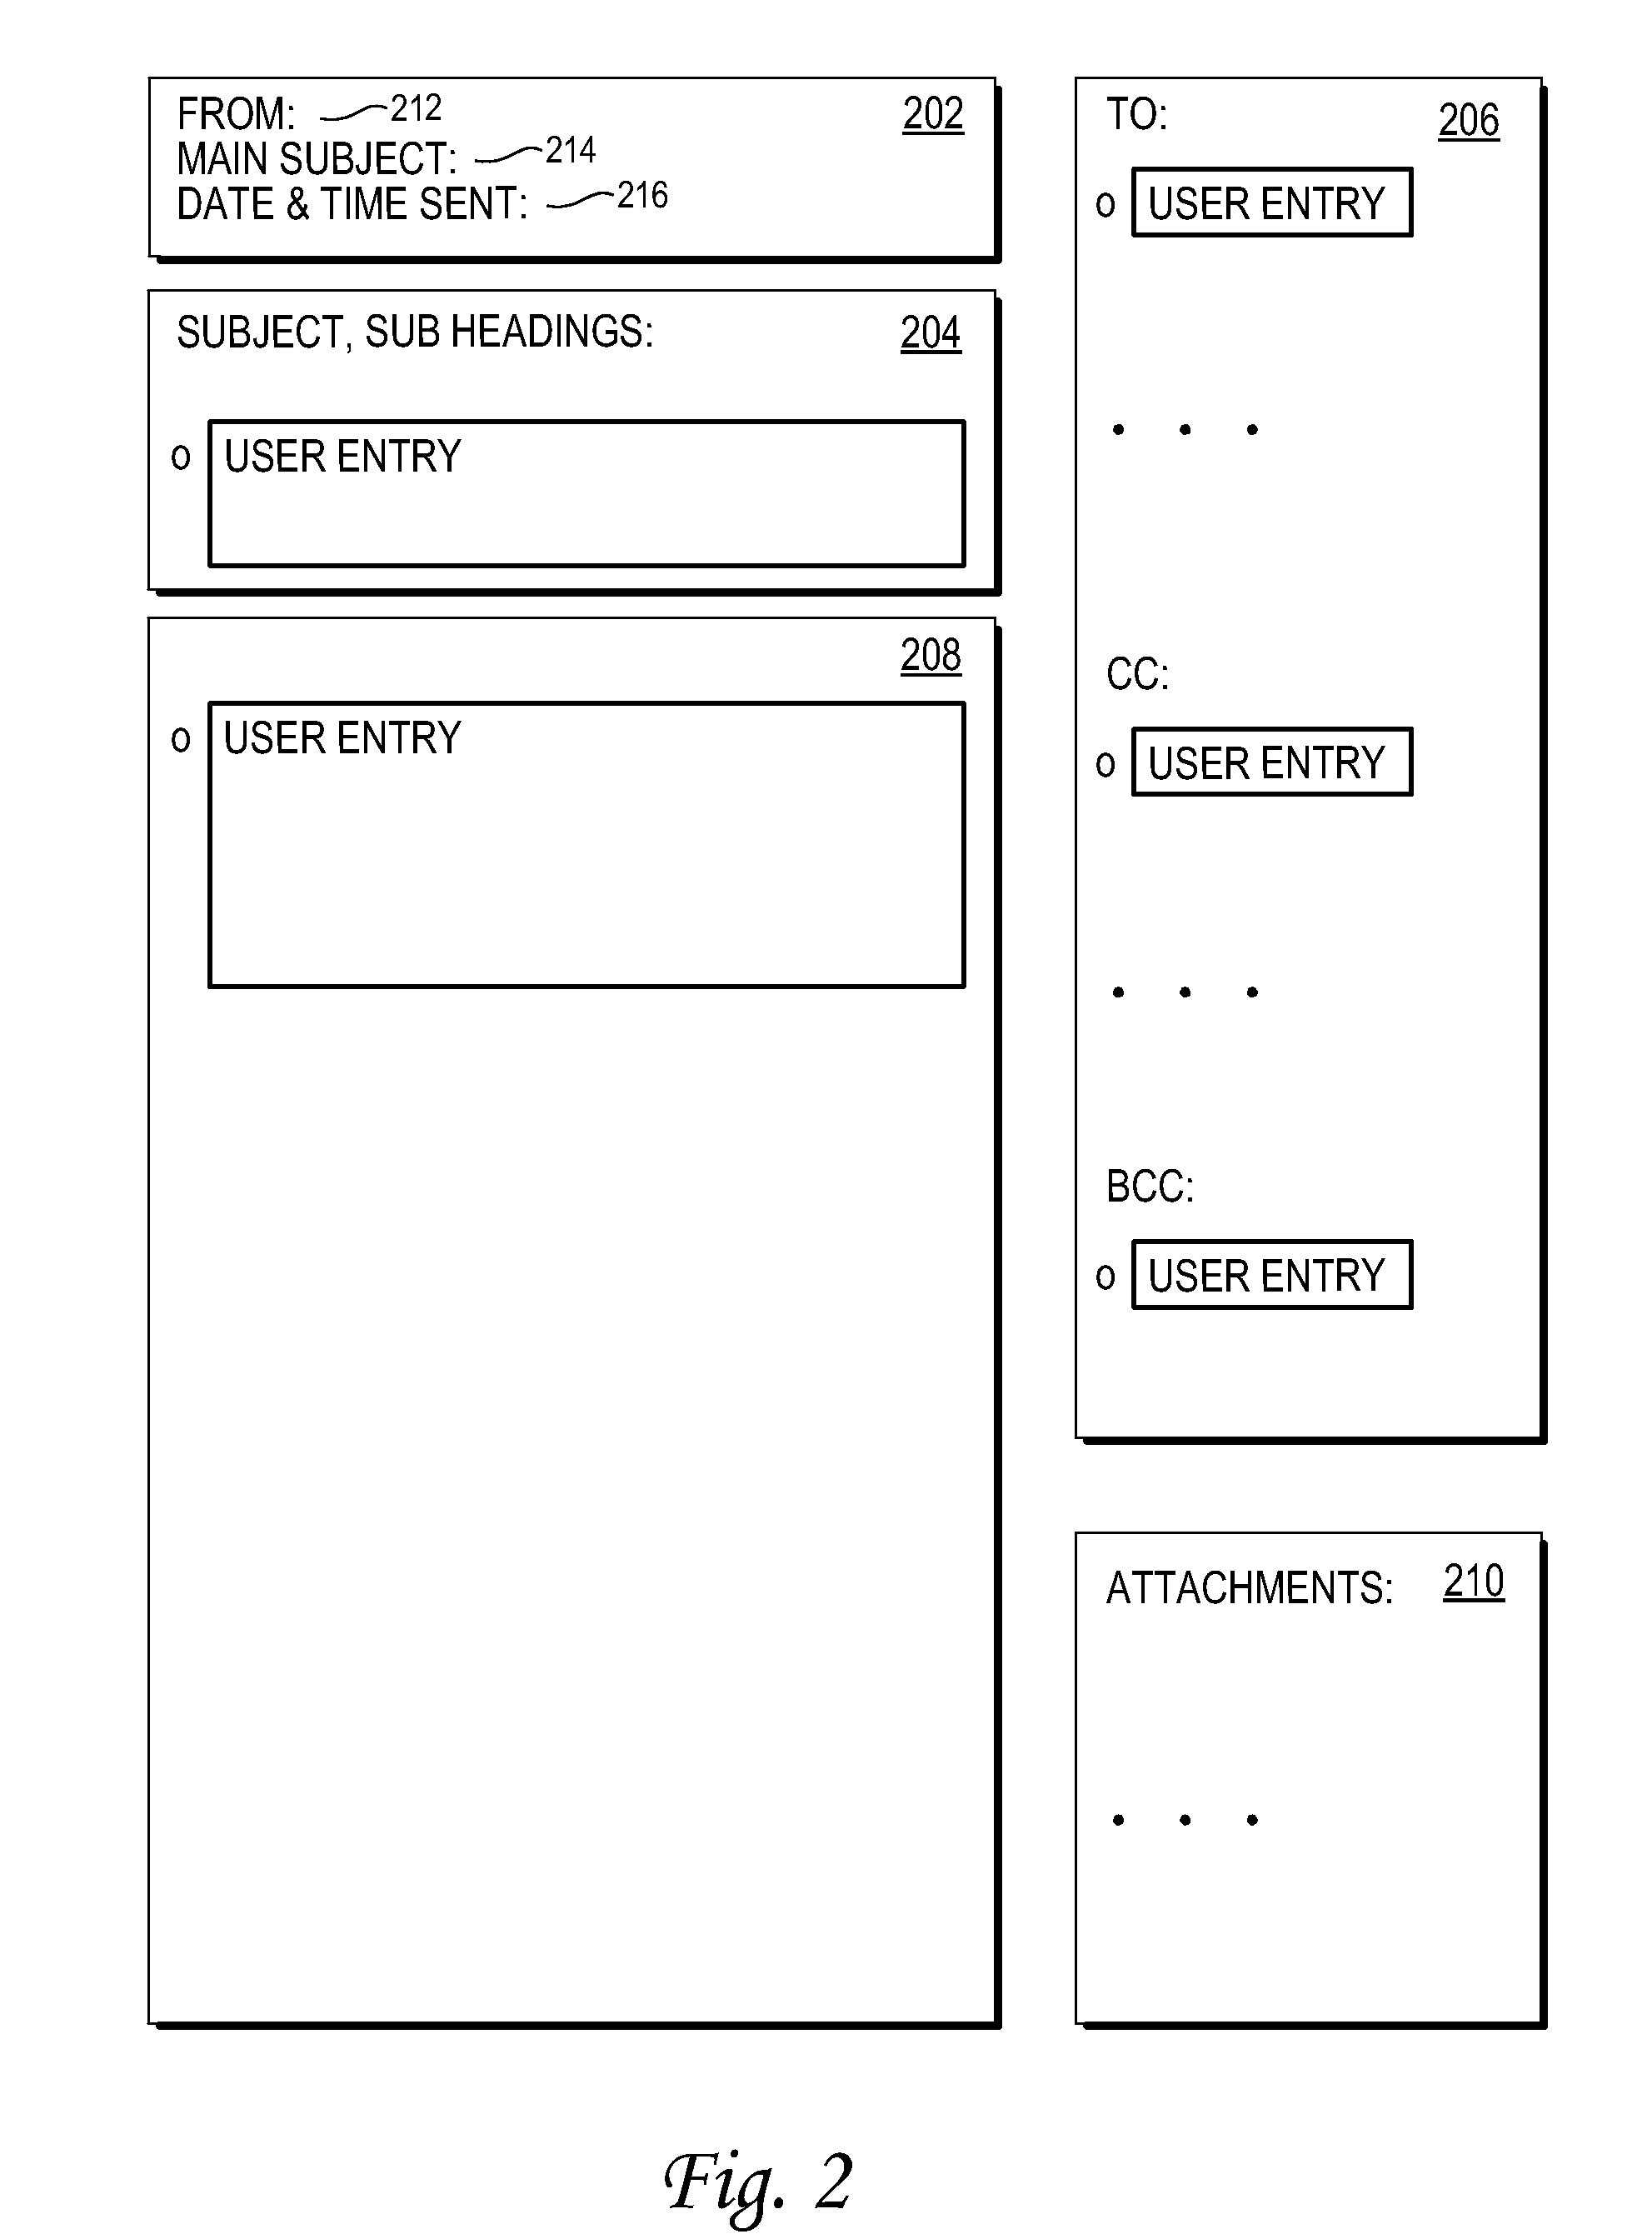 Mechanism for implementing reminders in an electronic messaging system